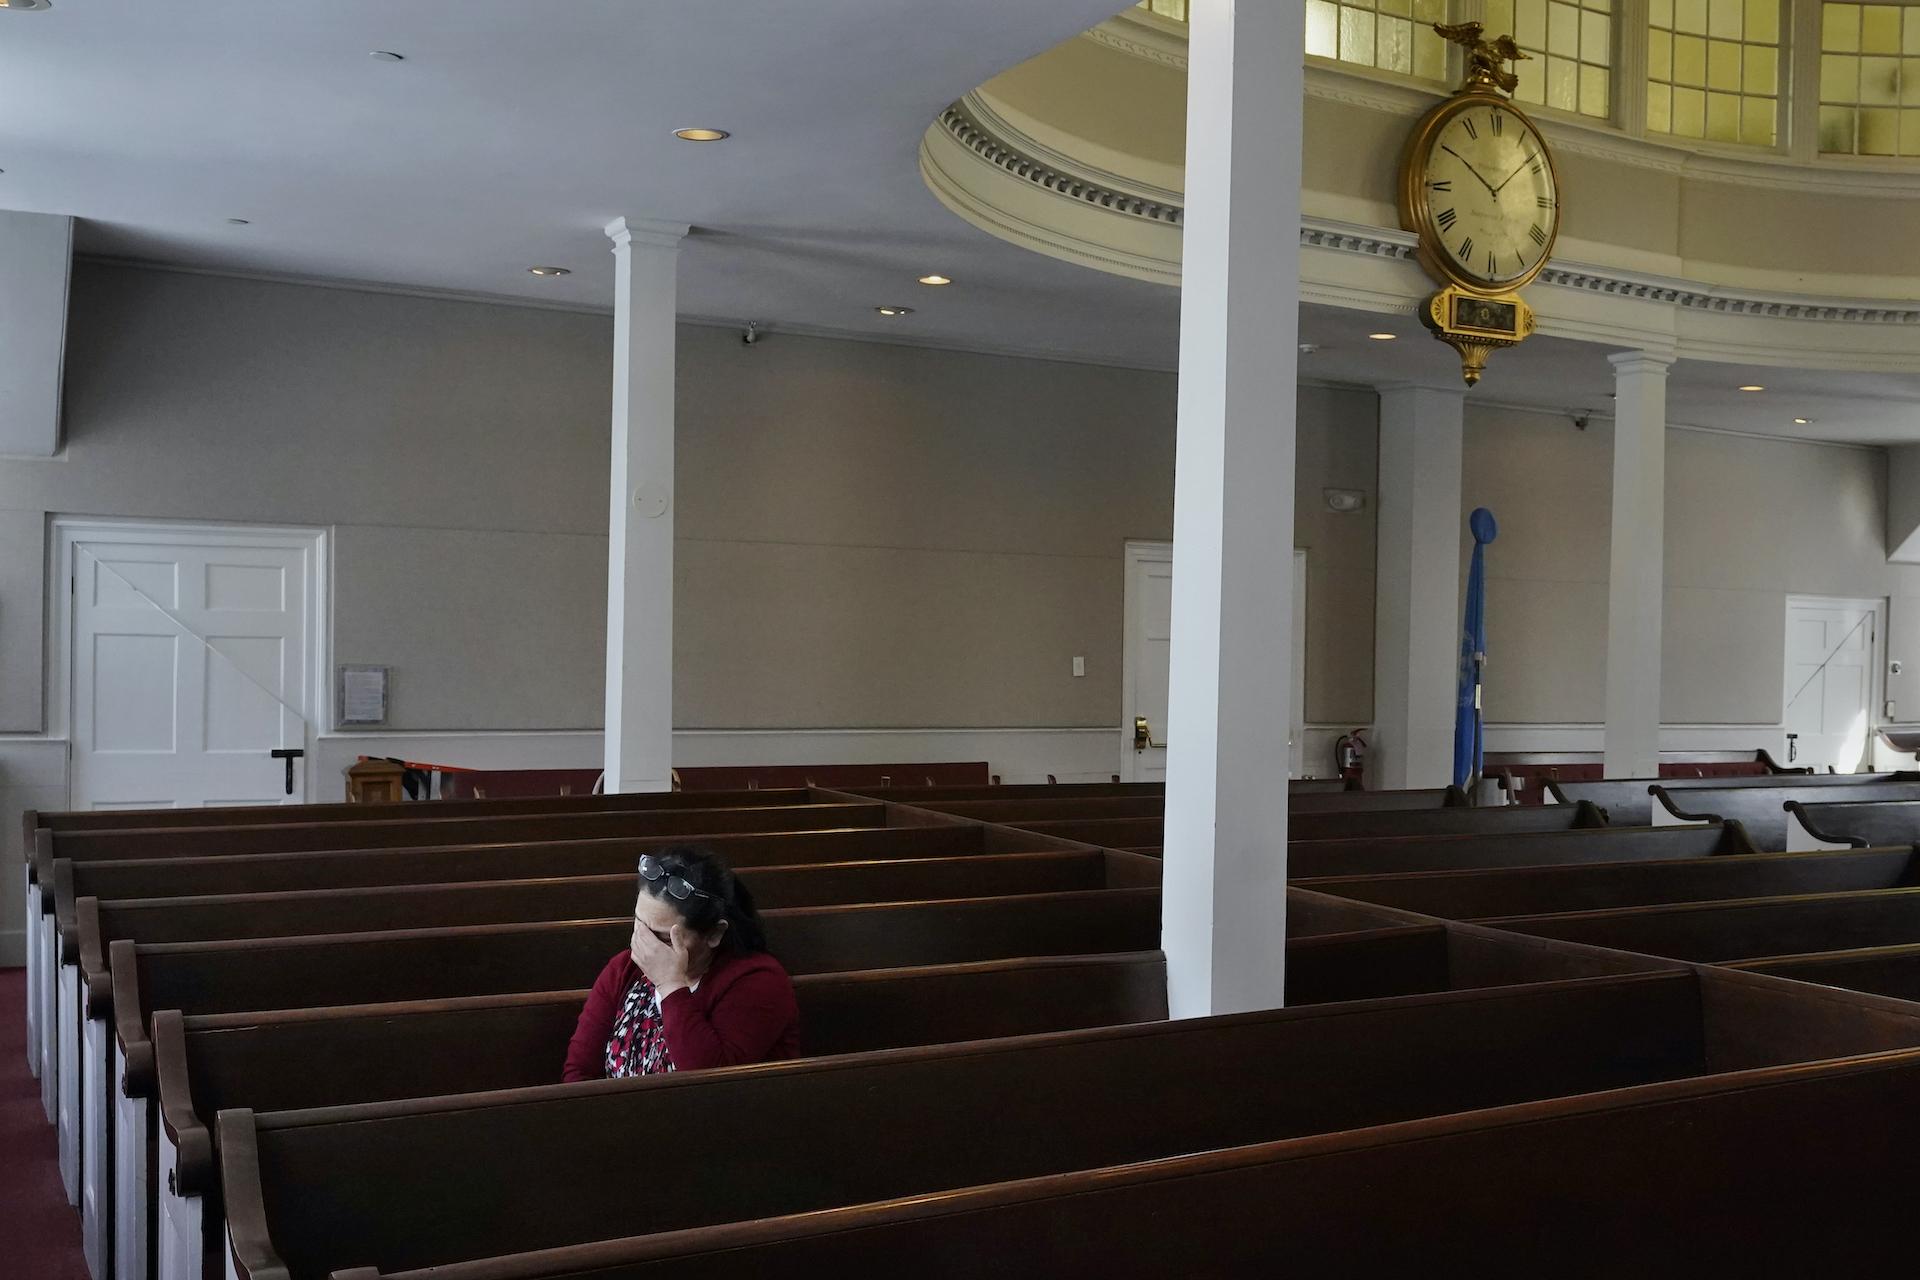 Maria Macario pauses as she talks about her family during an interview at the First Parish church, Friday, Jan. 29, 2021, in Bedford, Mass. (AP Photo/Charles Krupa)